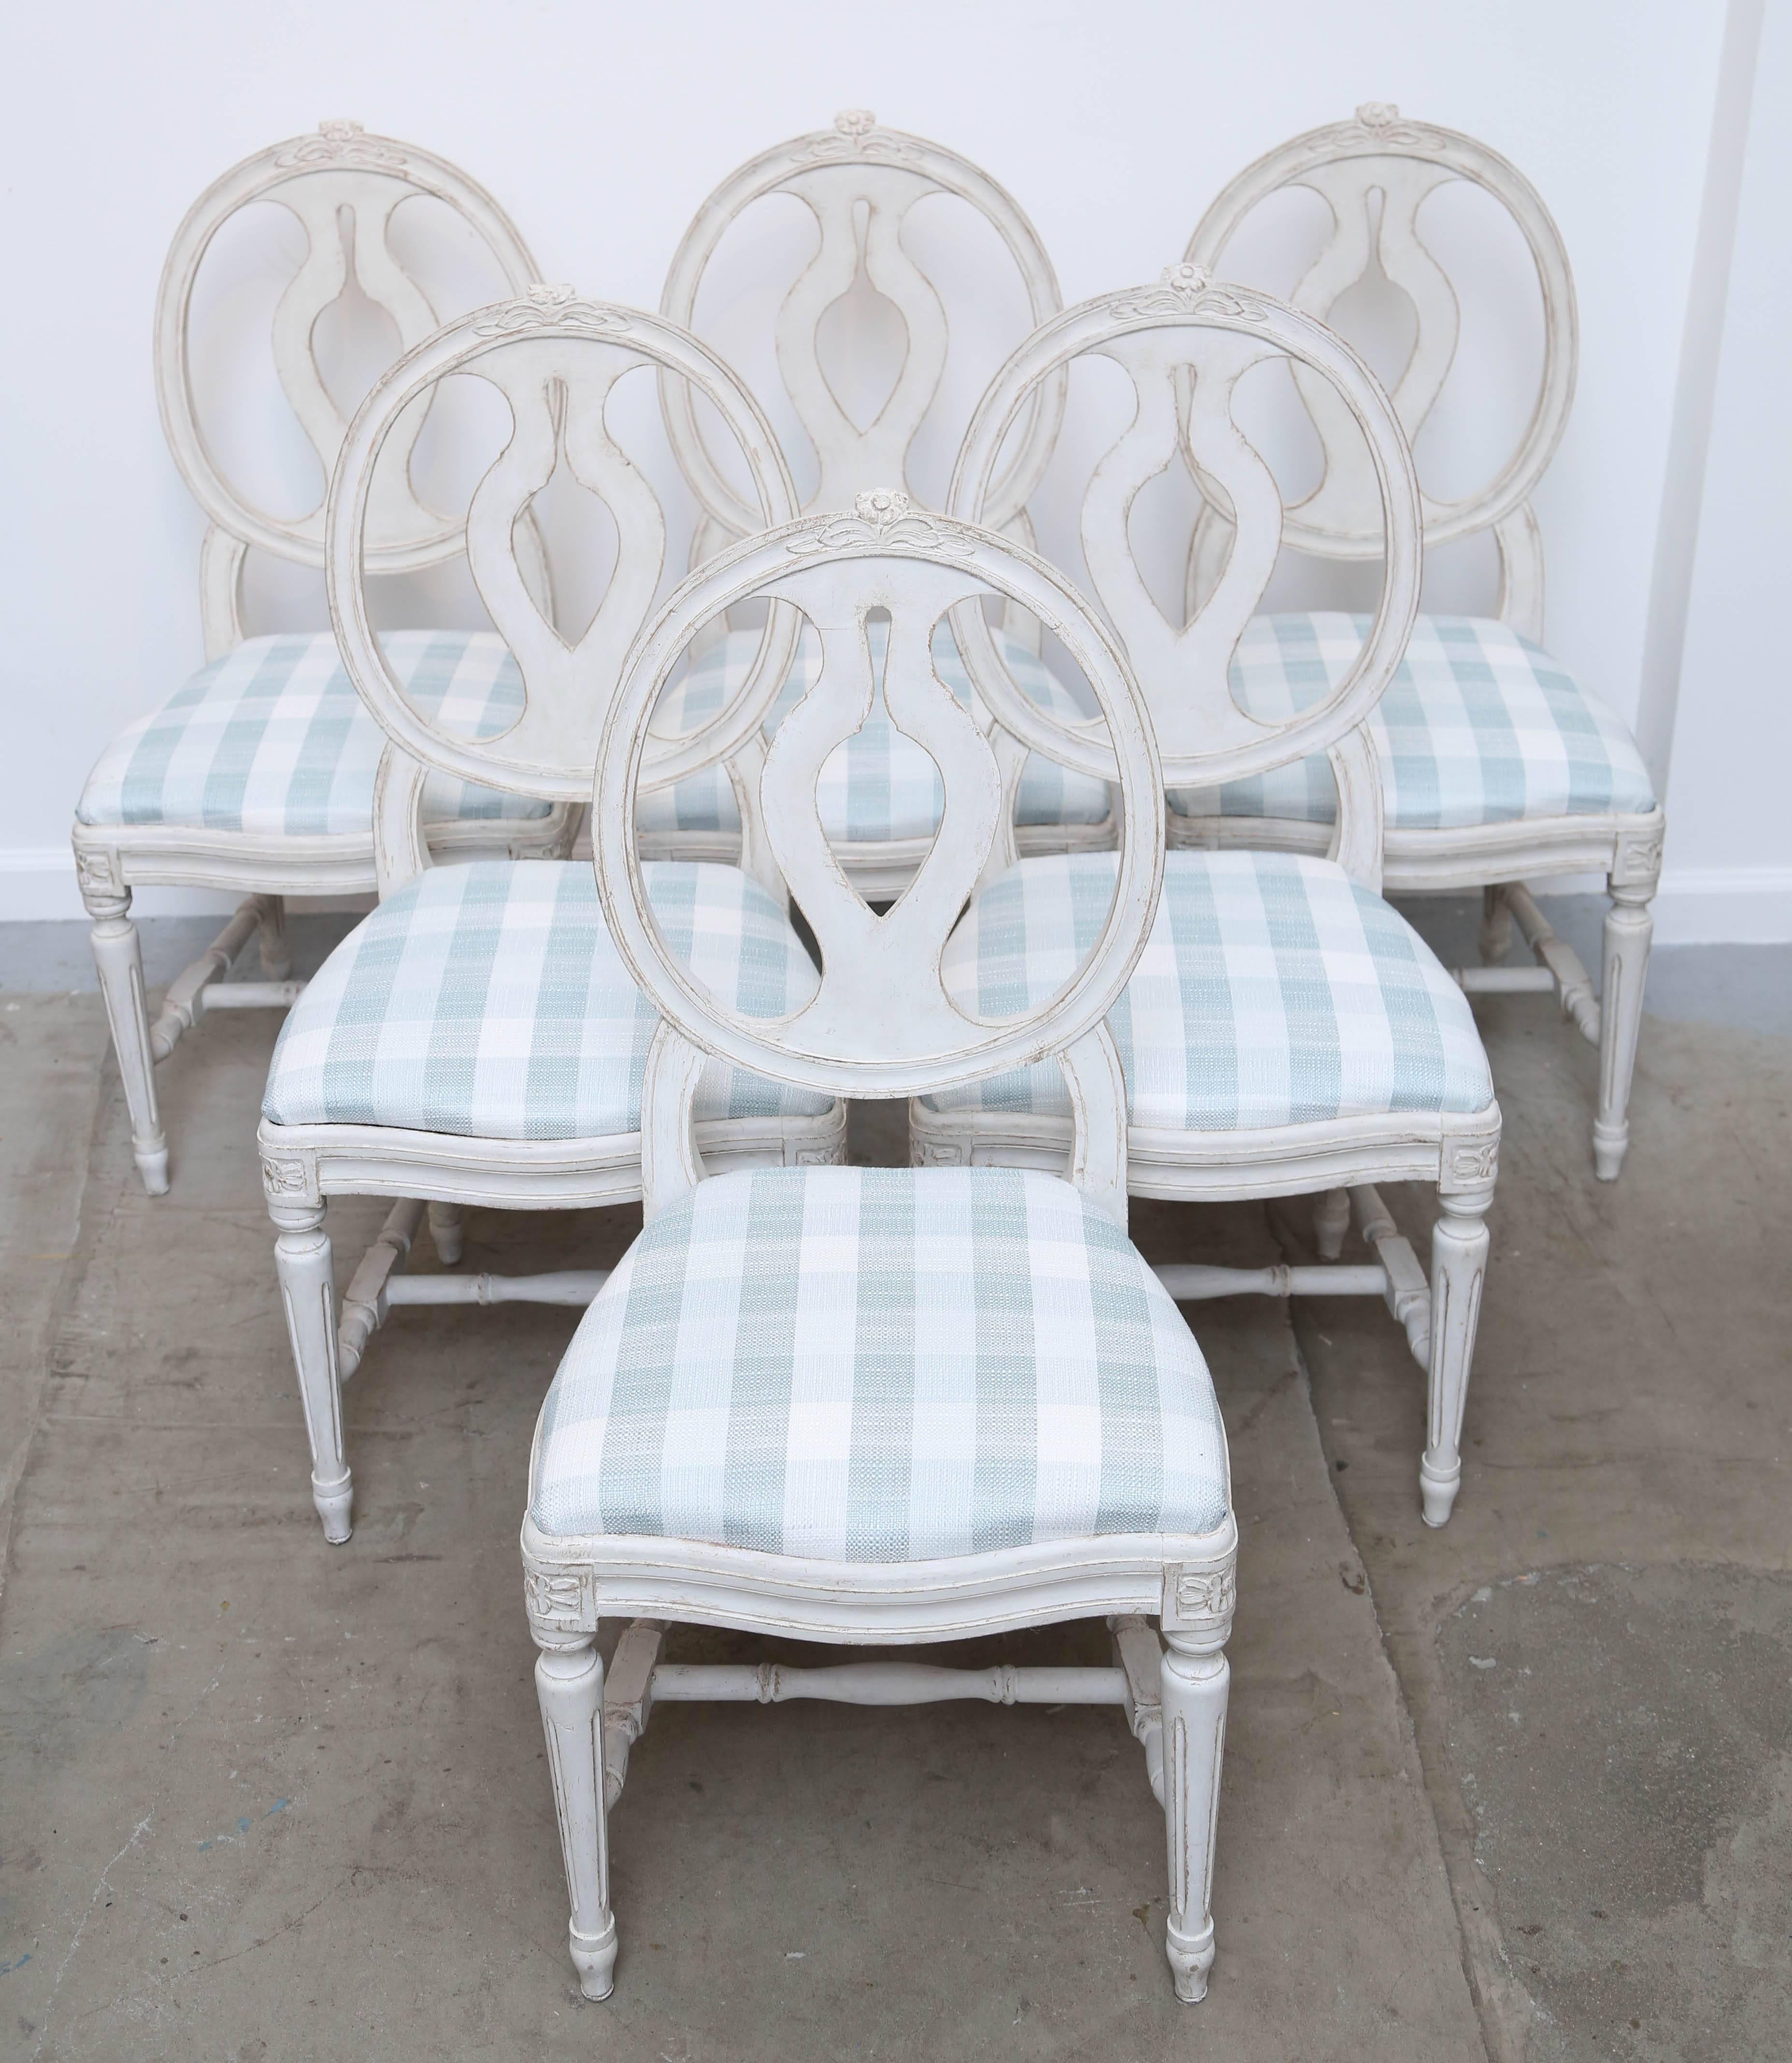 Set of six antique Swedish Gustavian Style painted dining chairs 
Late 19th century Classic medallion back with urn shape detail and carved
floral detail on top rail. Rosettes top of tapered fluted legs, bottom stretcher.
Painted in Swedish white